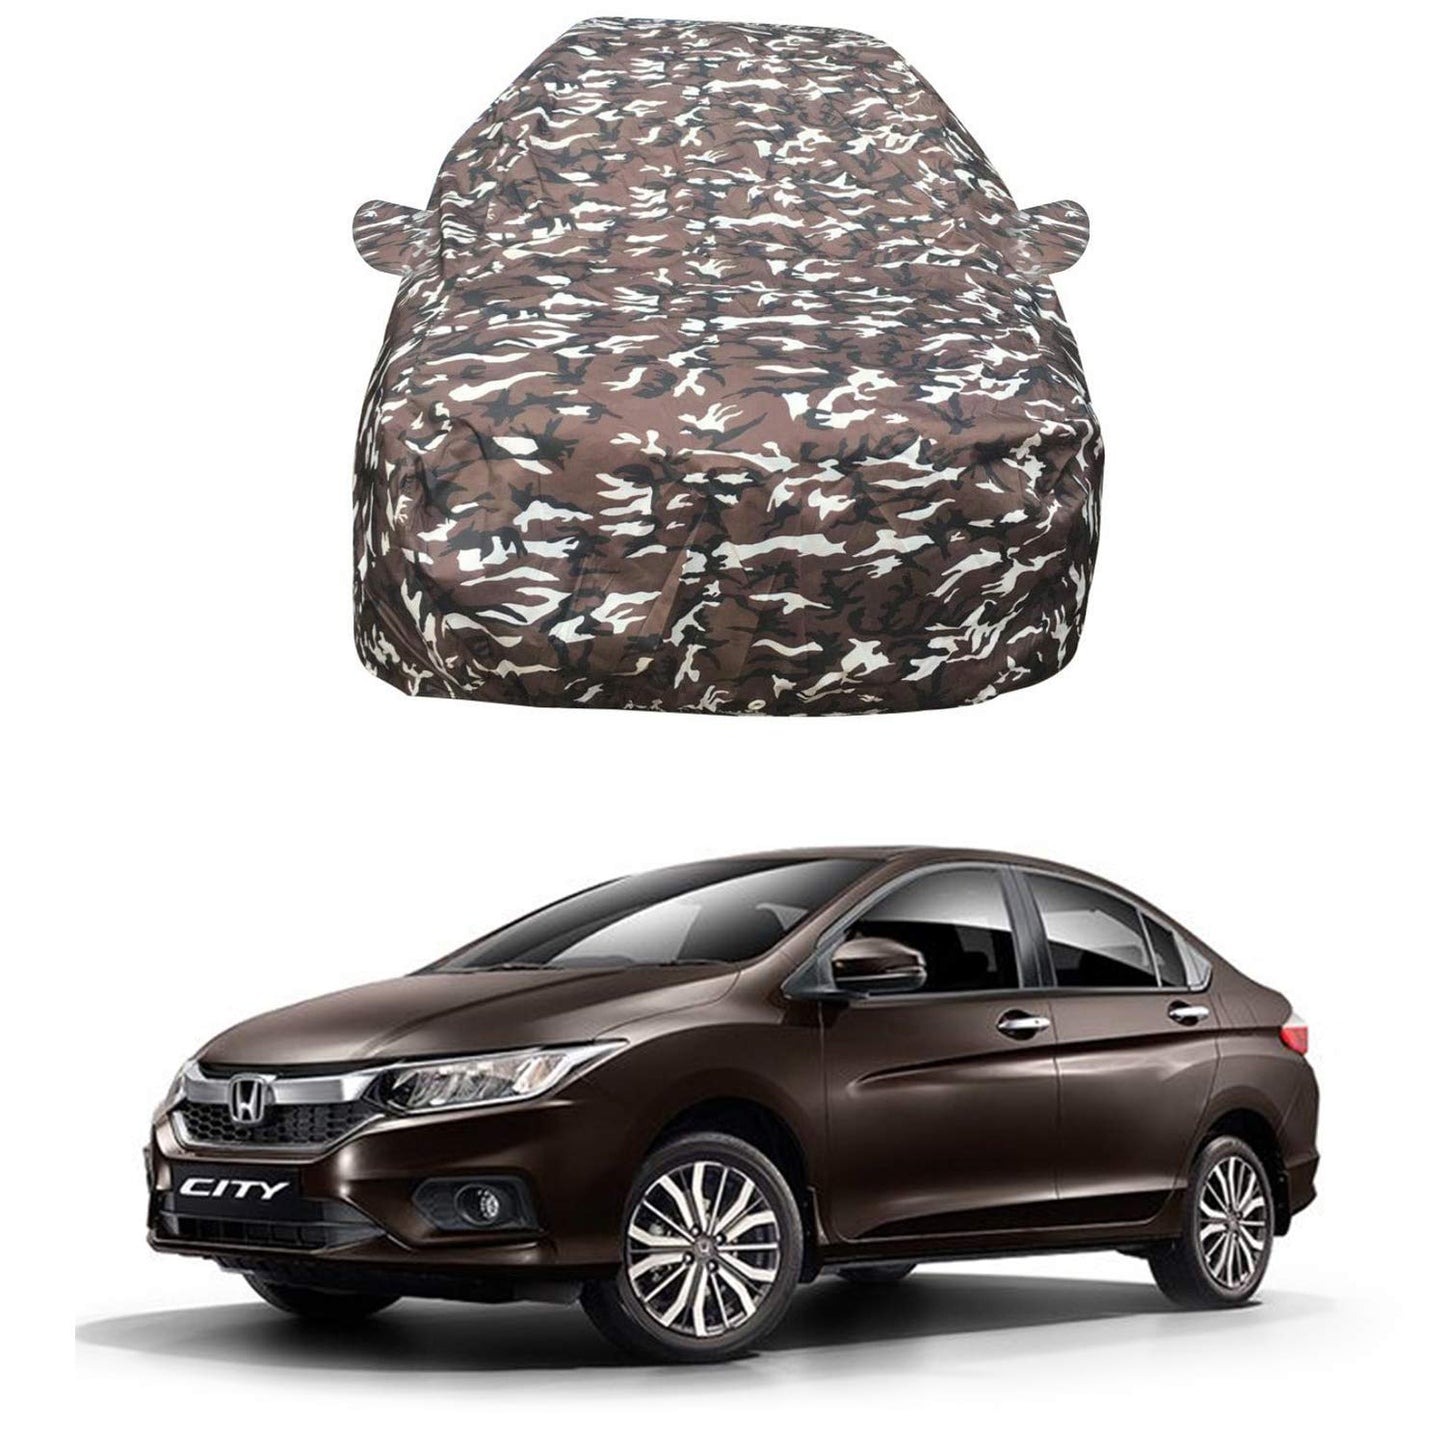 Oshotto Ranger Design Made of 100% Waterproof Fabric Multicolor Car Body Cover with Mirror Pockets For Honda City Idtec 2014-2023